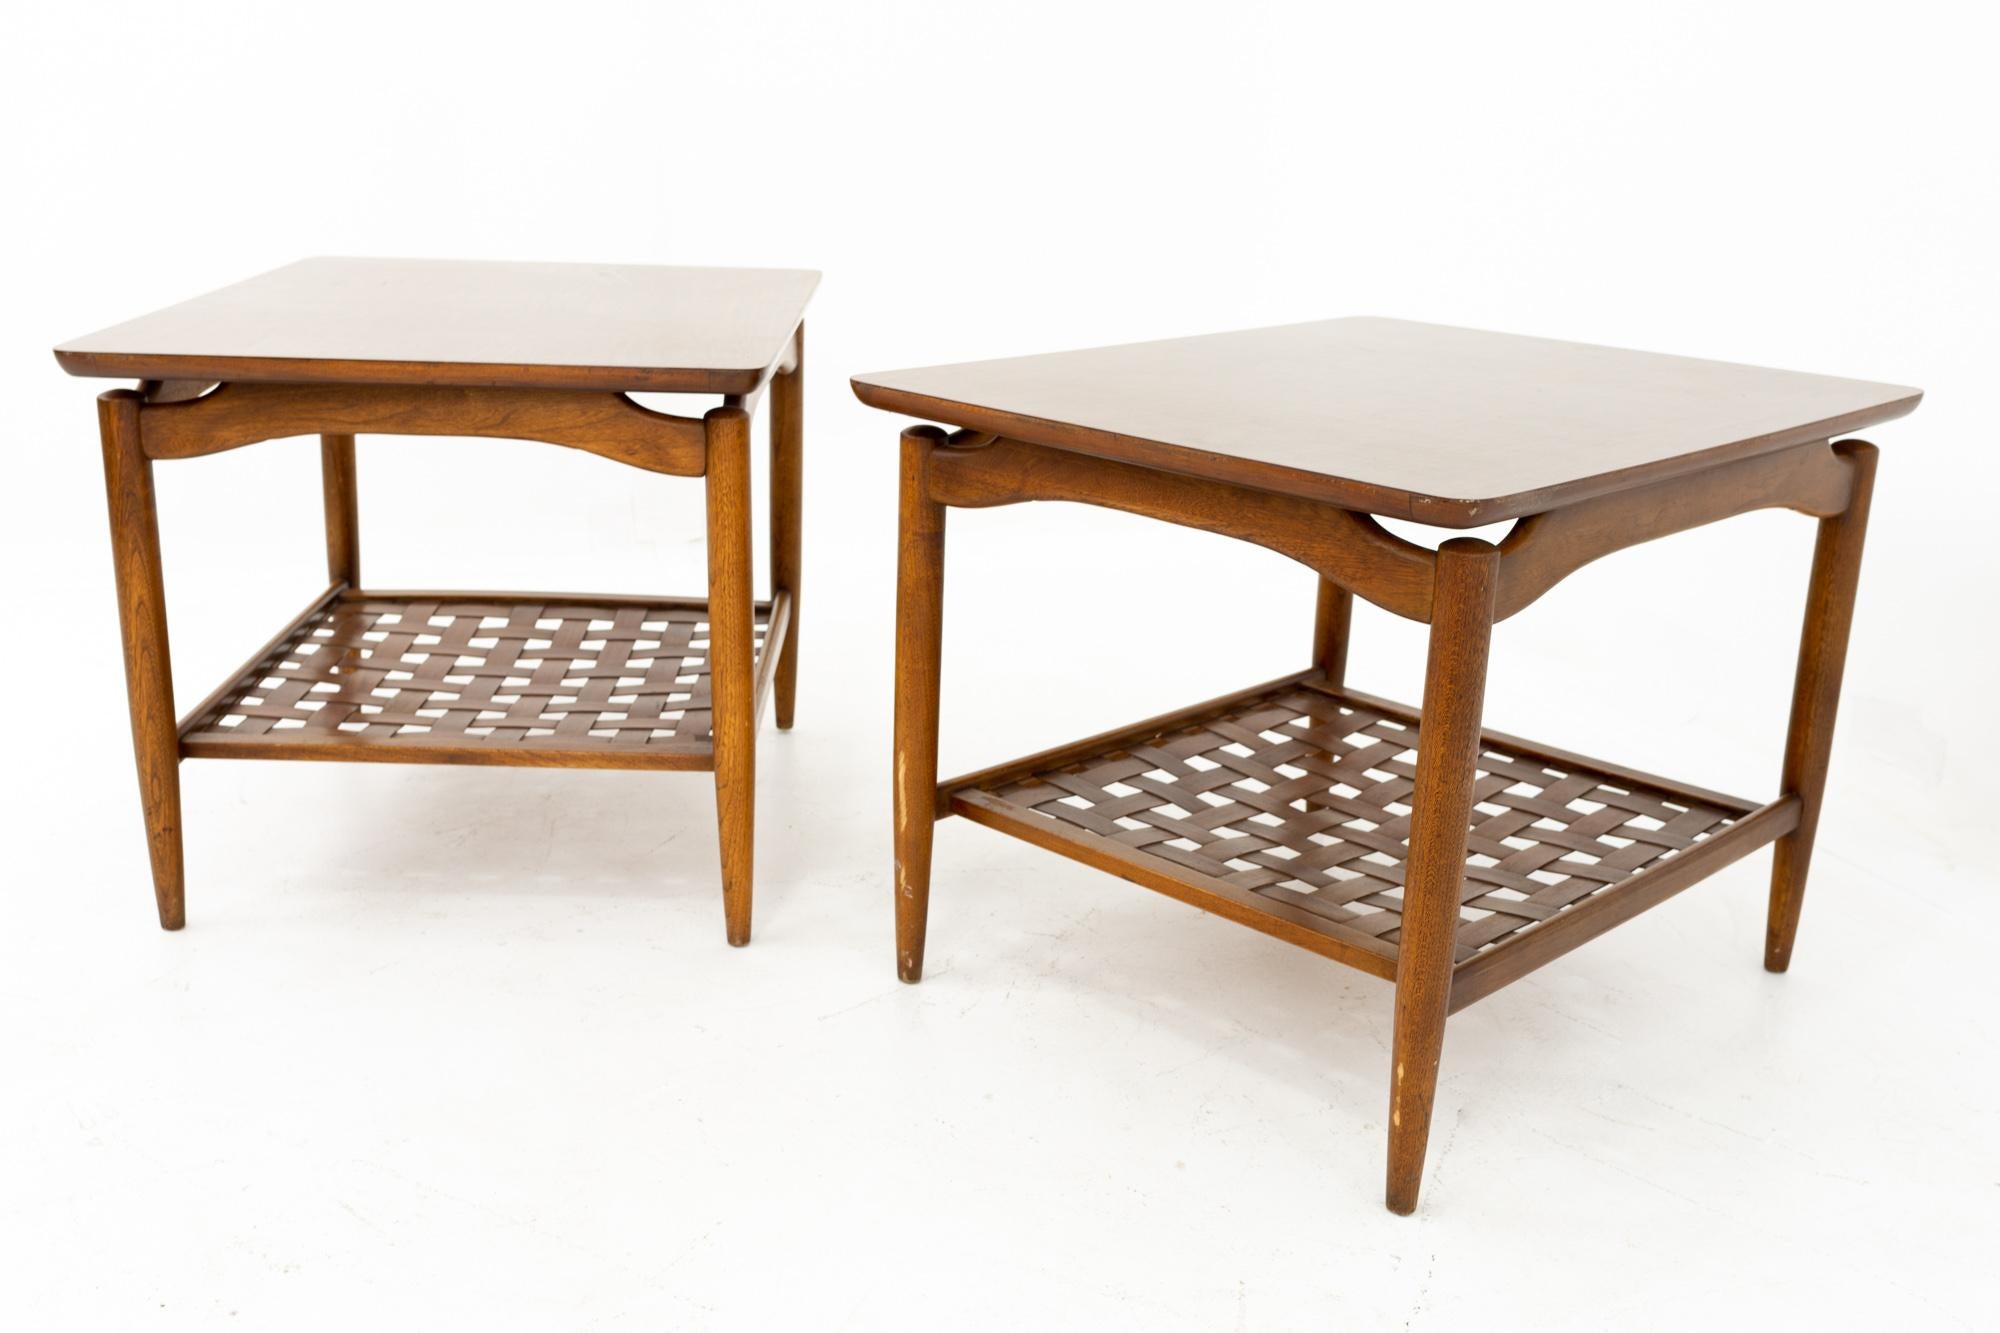 Grets Magnusson Grossman style midcentury walnut and Formica top side end tables, pair
These tables are 28 wide x 22 deep x 20 inches high

All pieces of furniture can be had in what we call restored vintage condition. That means the piece is